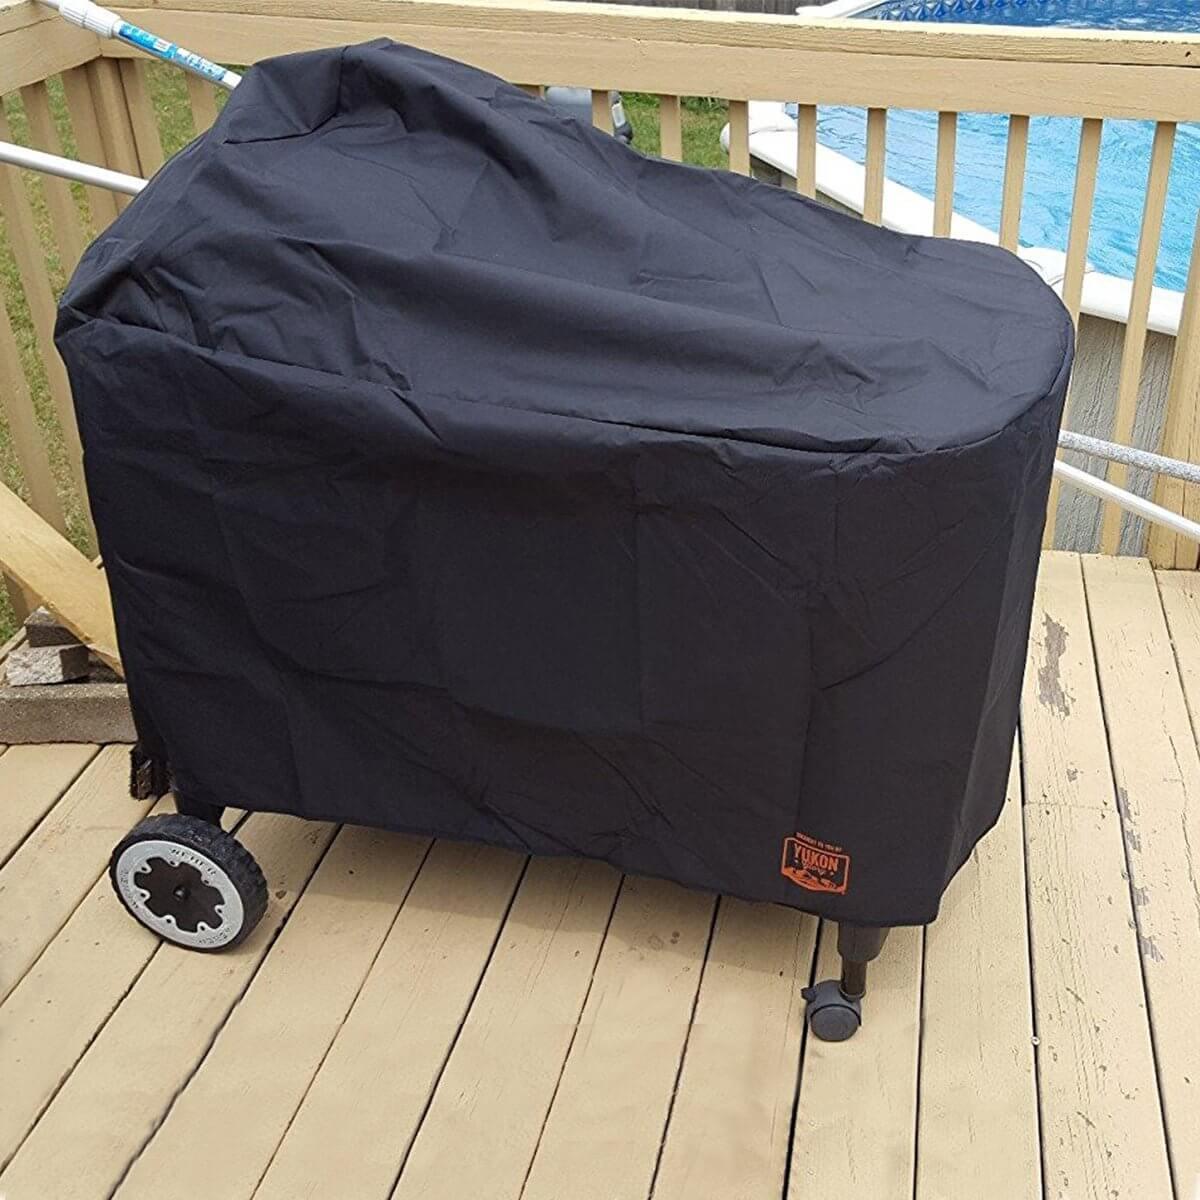 7152 Grill Cover for 22" Weber Performer Charcoal Grills